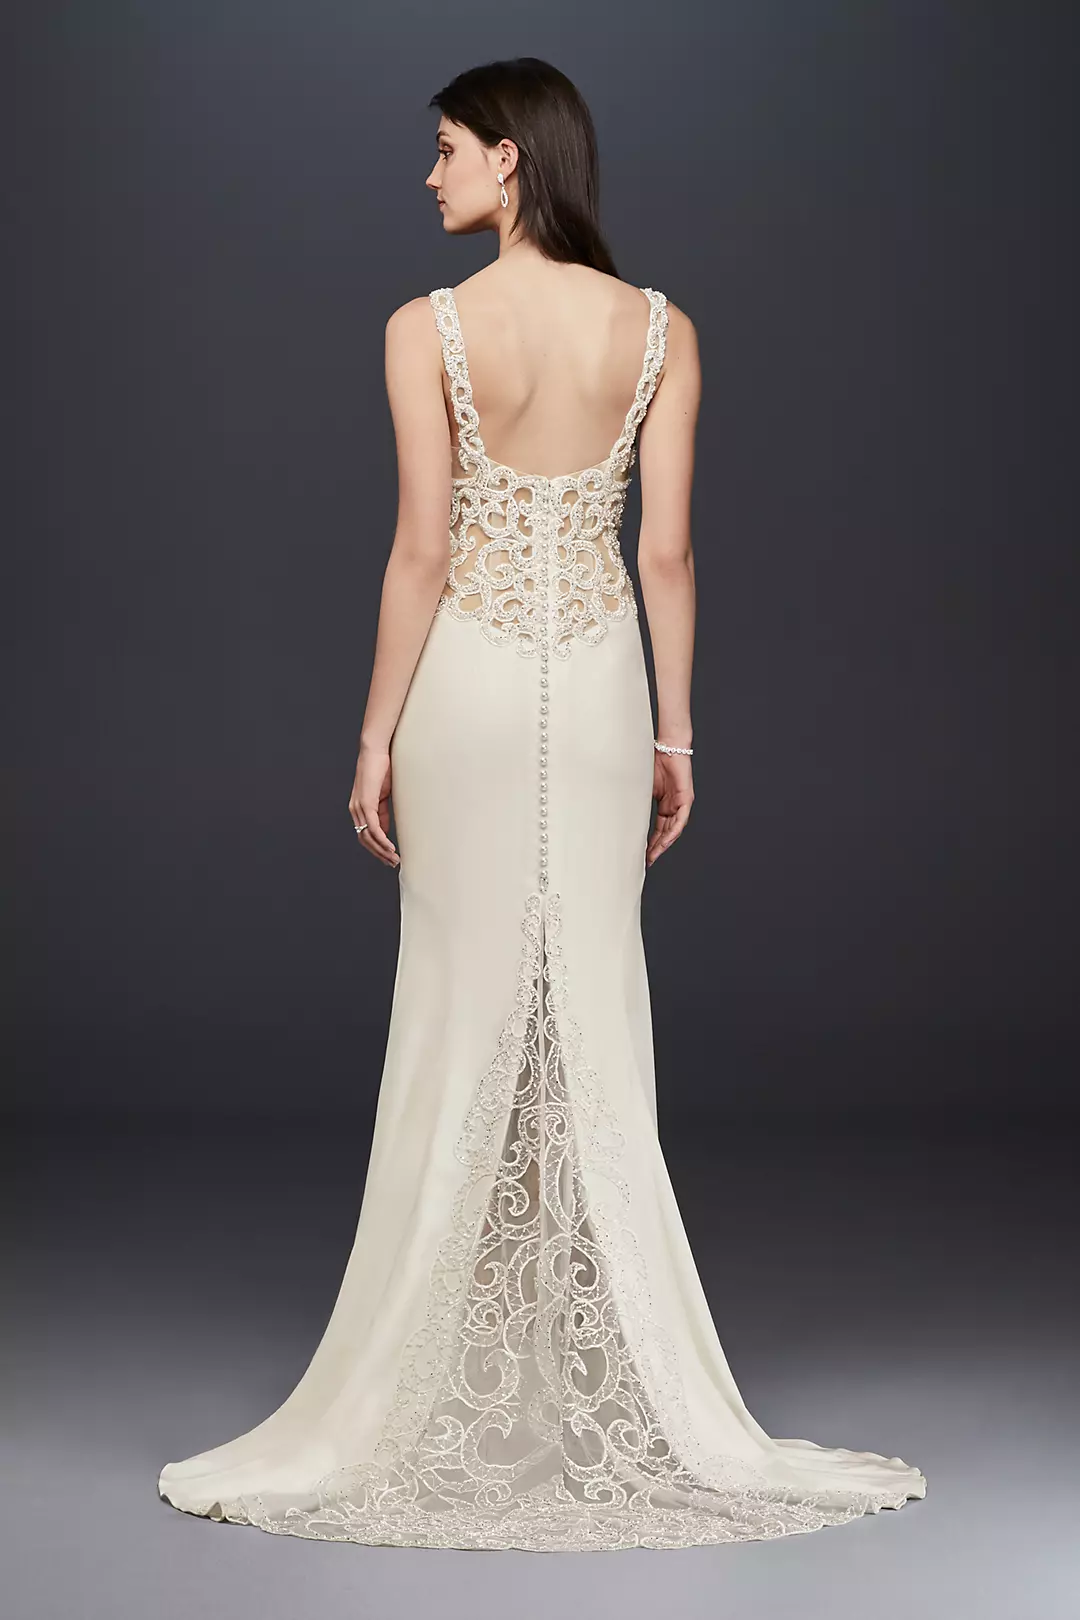 As Is Beaded and Crepe Petite Wedding Dress Image 2